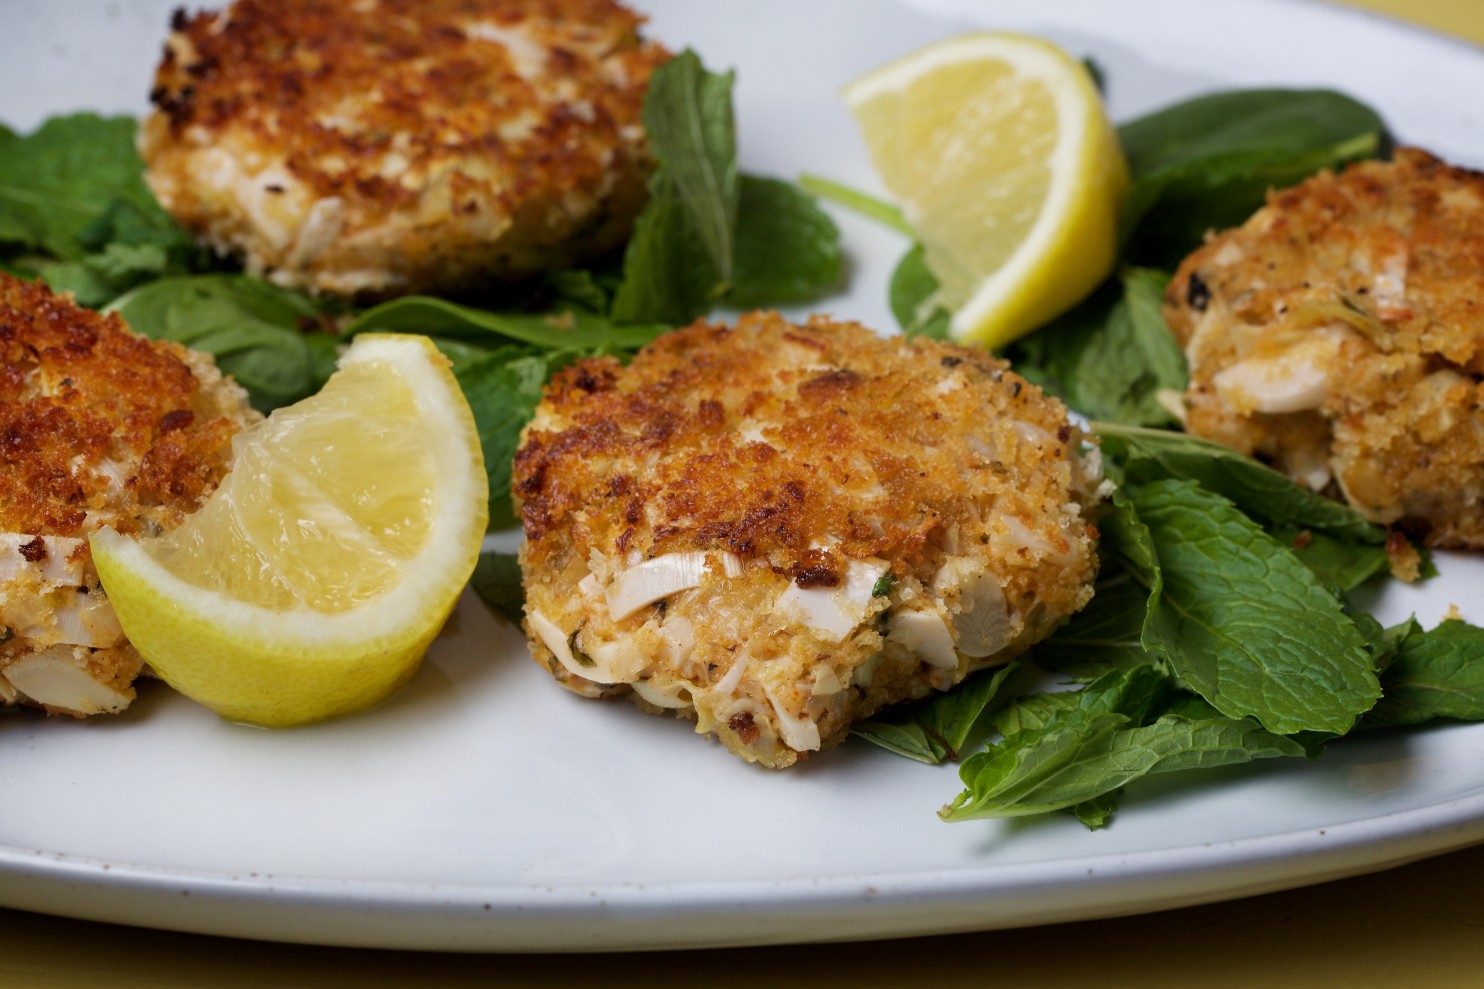 These “crab cakes” are mad